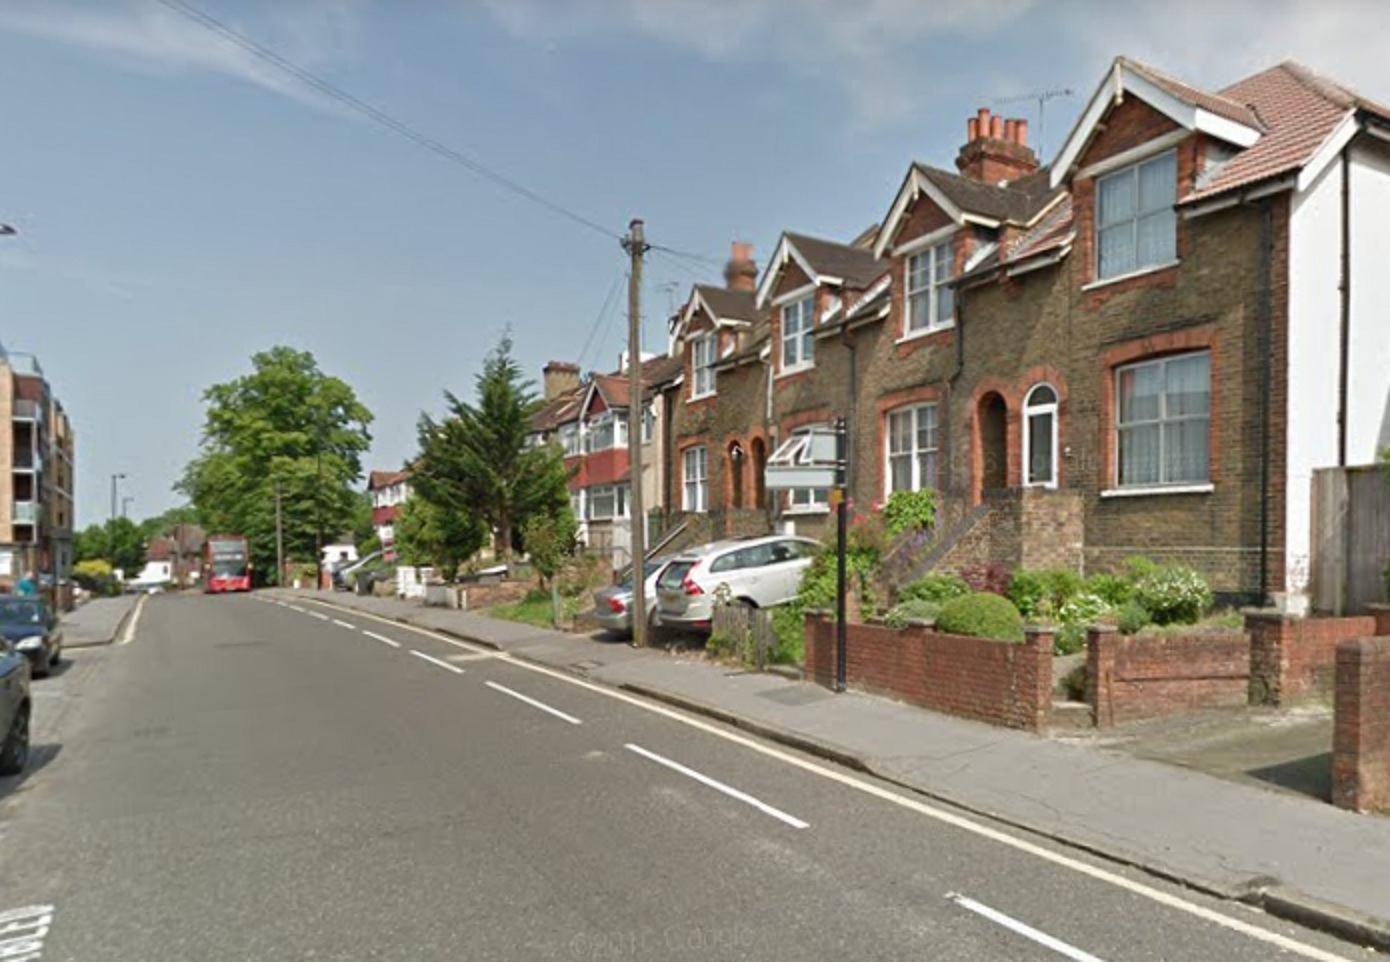 The proposals would see the demolition of 14 terraced houses along Whytecliffe Road South